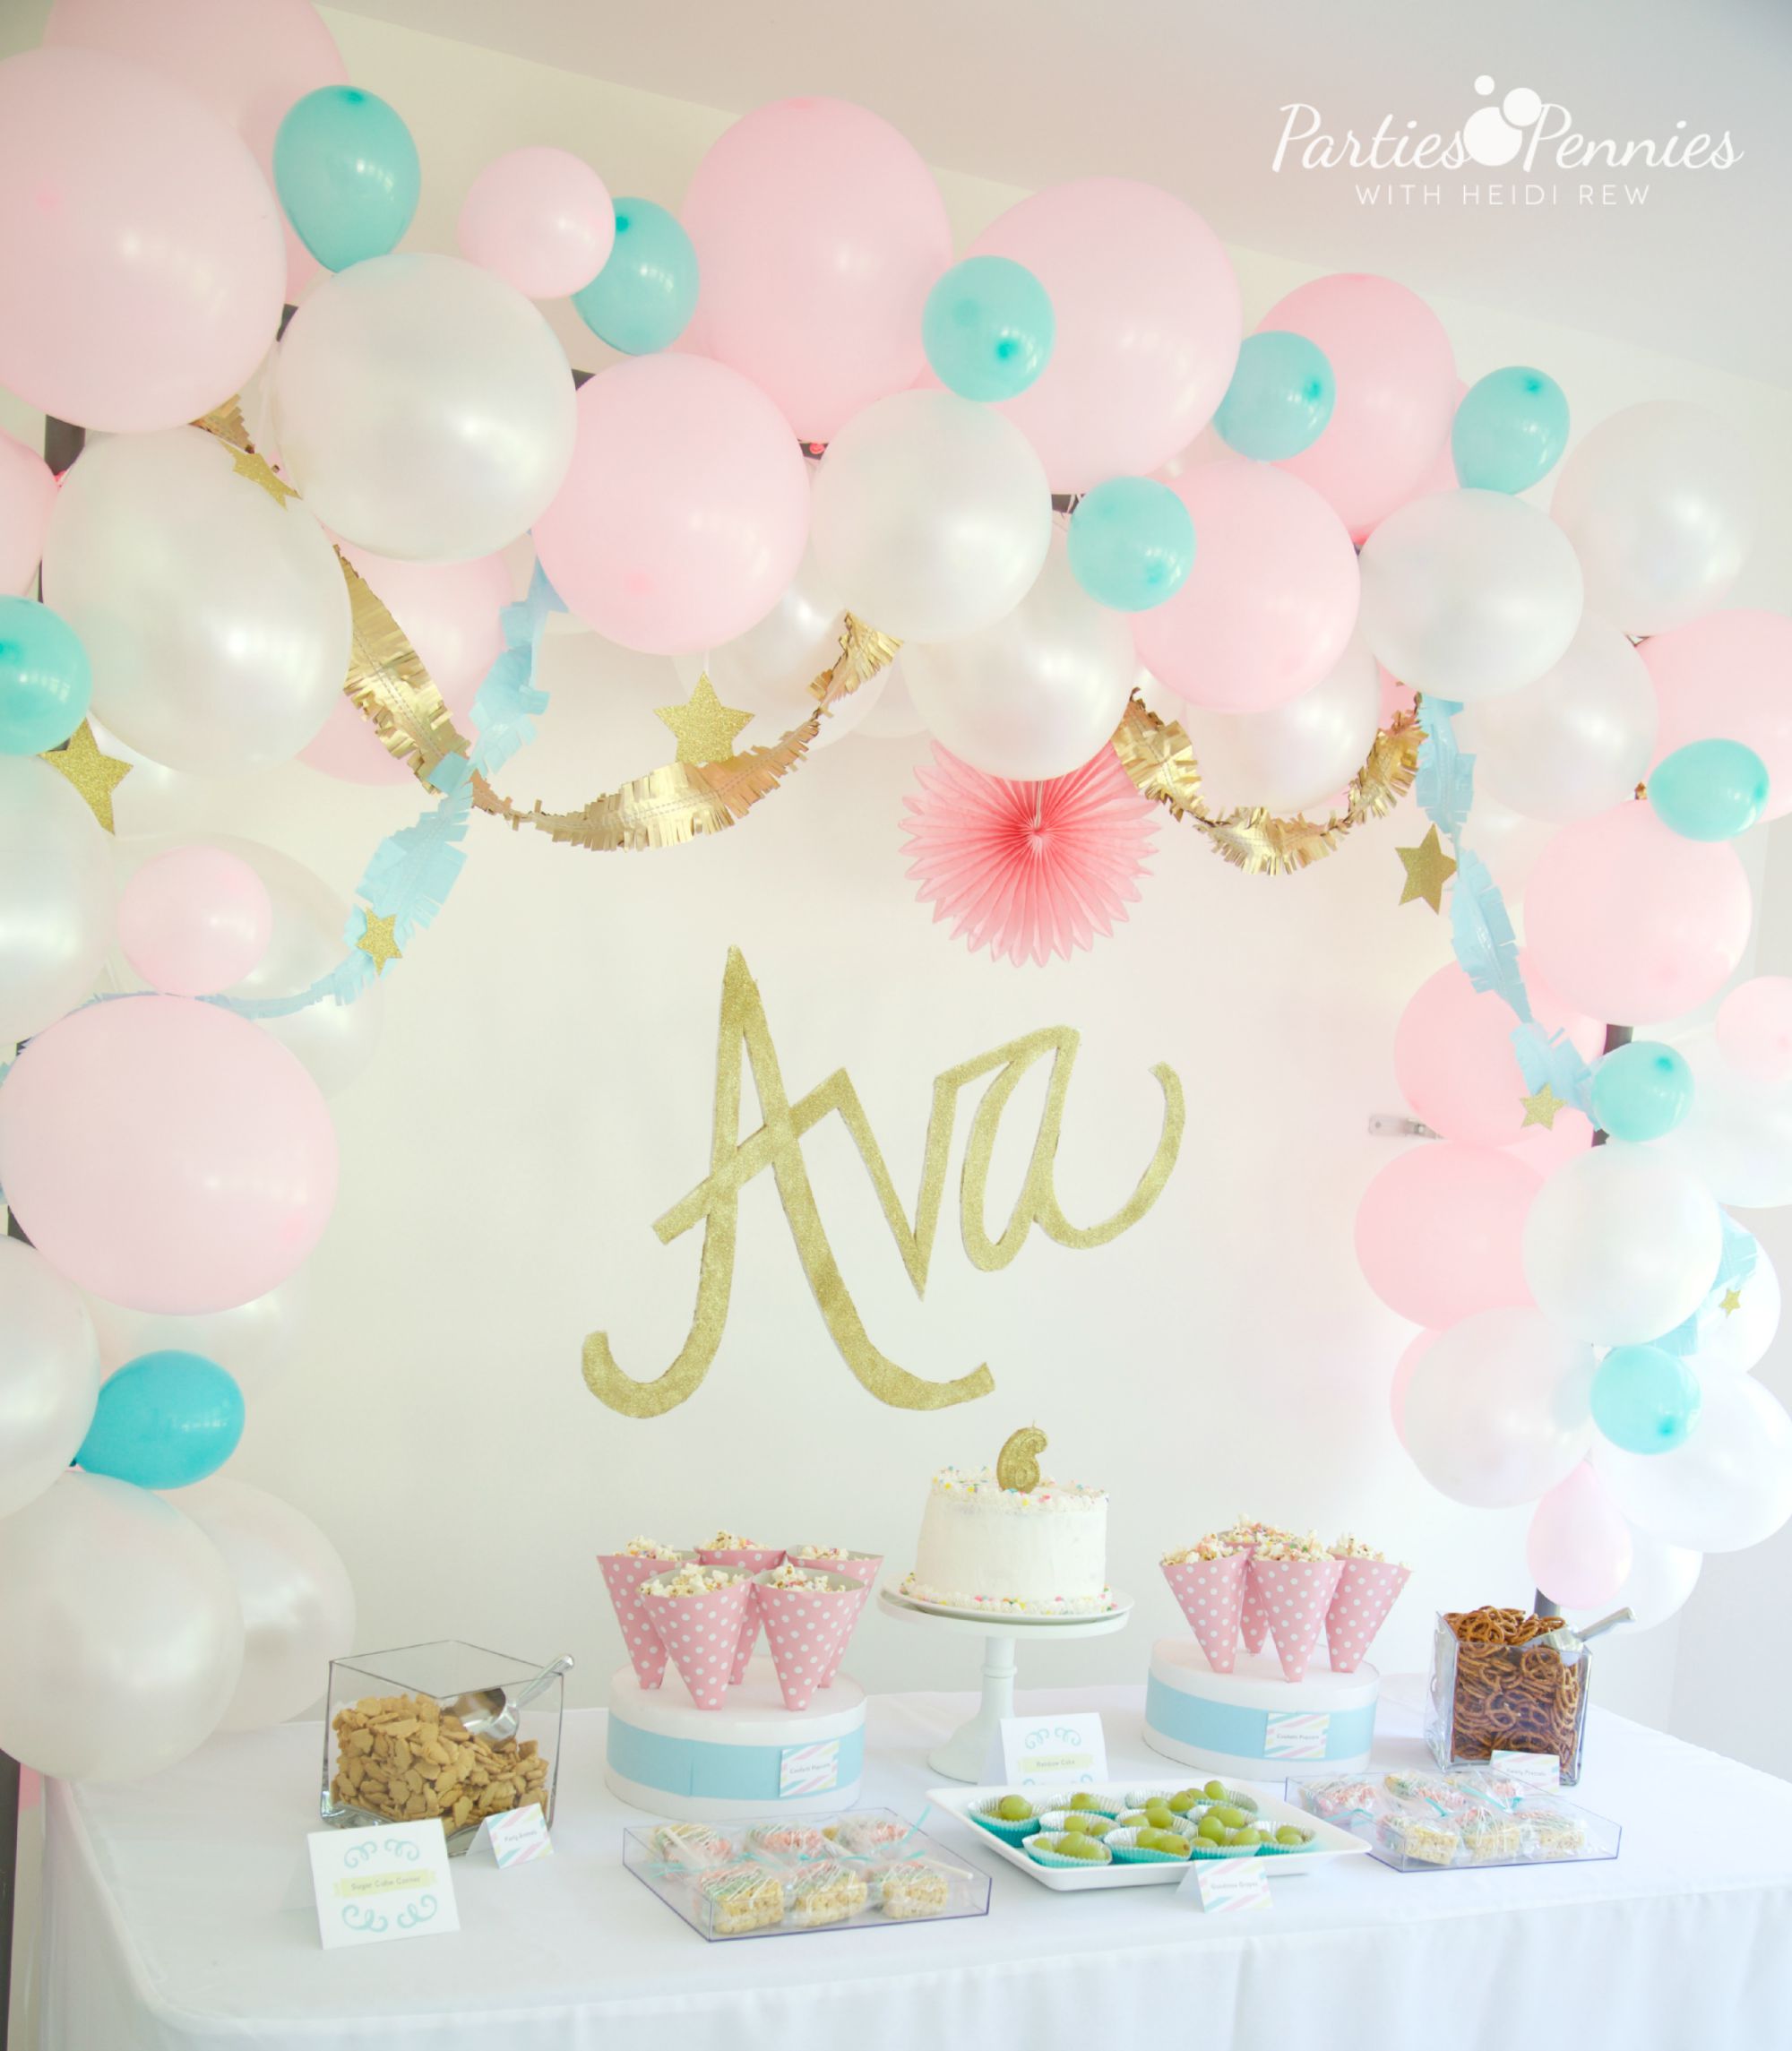 DIY Photo Backdrop - Parties for Pennies